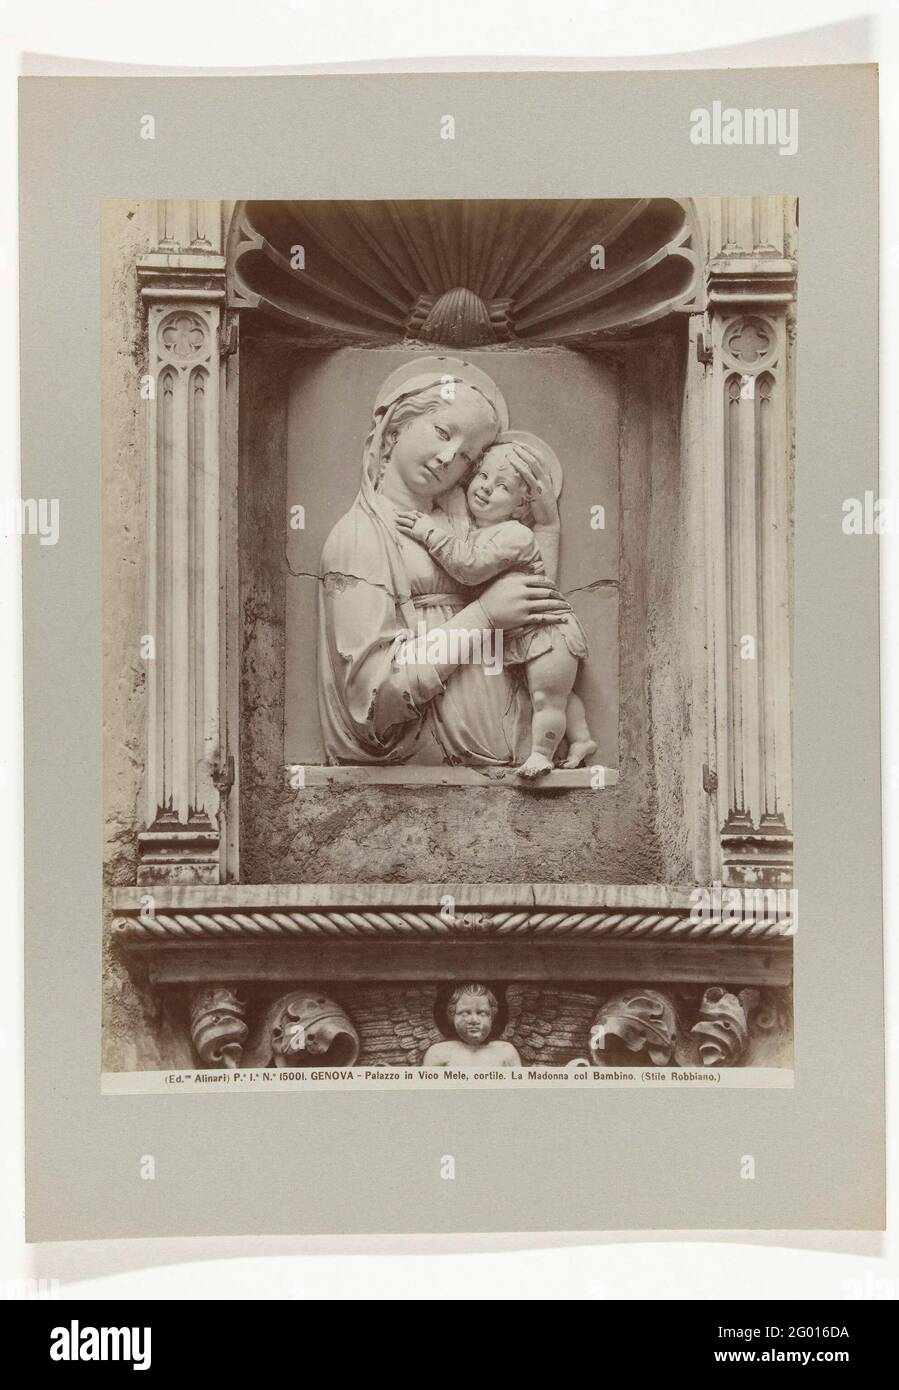 Sculptuur Van Madonna Met Kind; P.E 1.a No. 15001. Genoa - Palace in Vico apples, courtyard. The Madonna and Child. (Styloe Robbiano.). Stock Photo